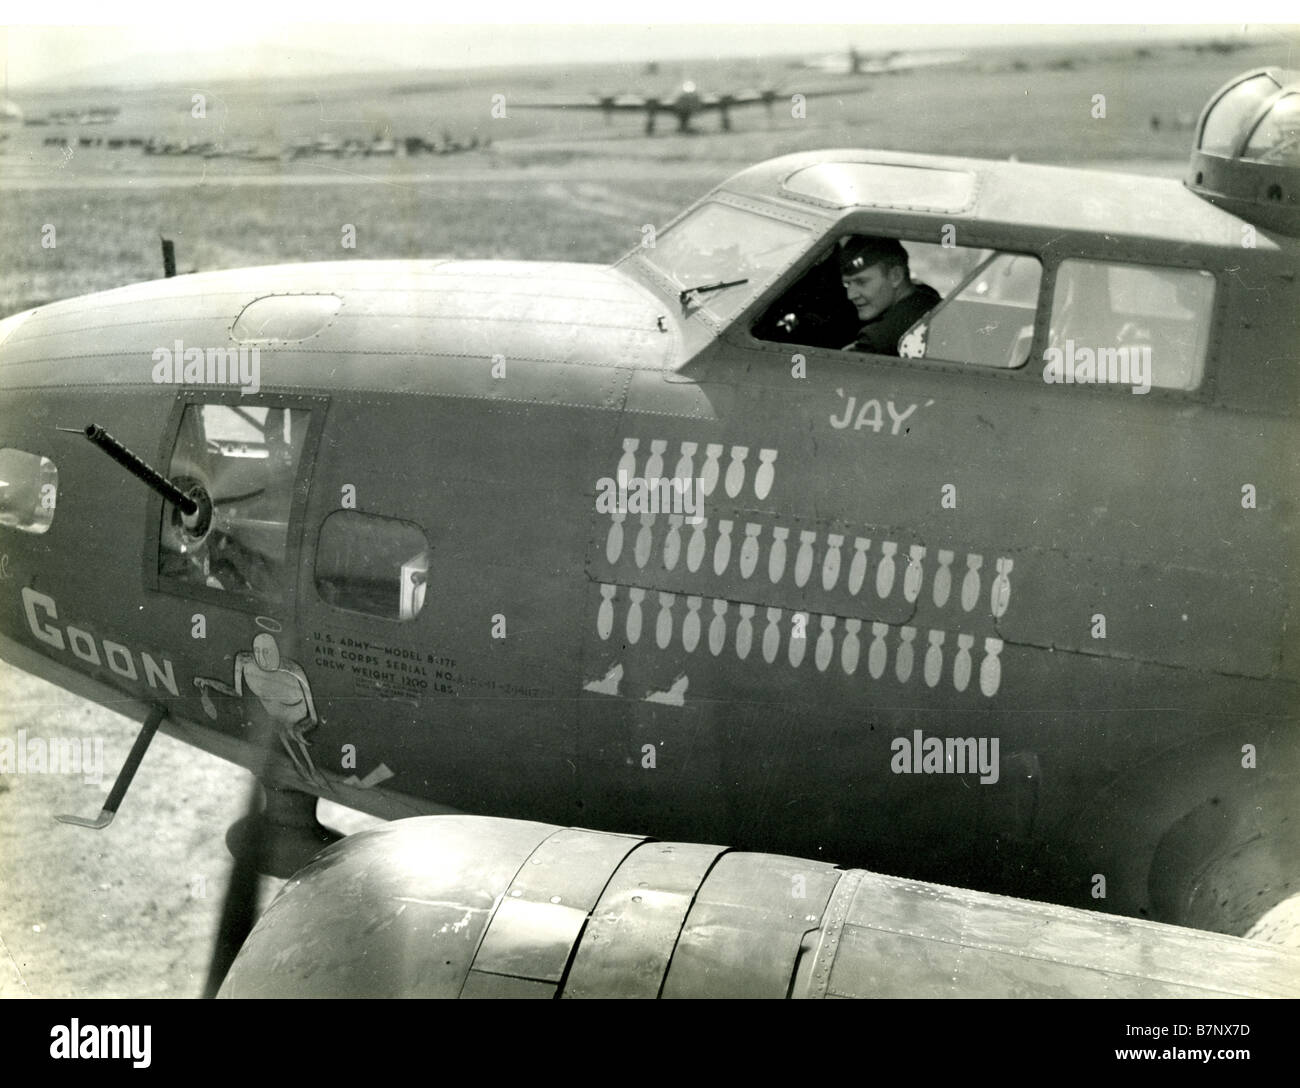 BOEING B-17F FLYING FORTRESS piloted by Capt Jay Shelley with the 32nd Bomb Squadron of the USAAF in 1943- see Description below Stock Photo